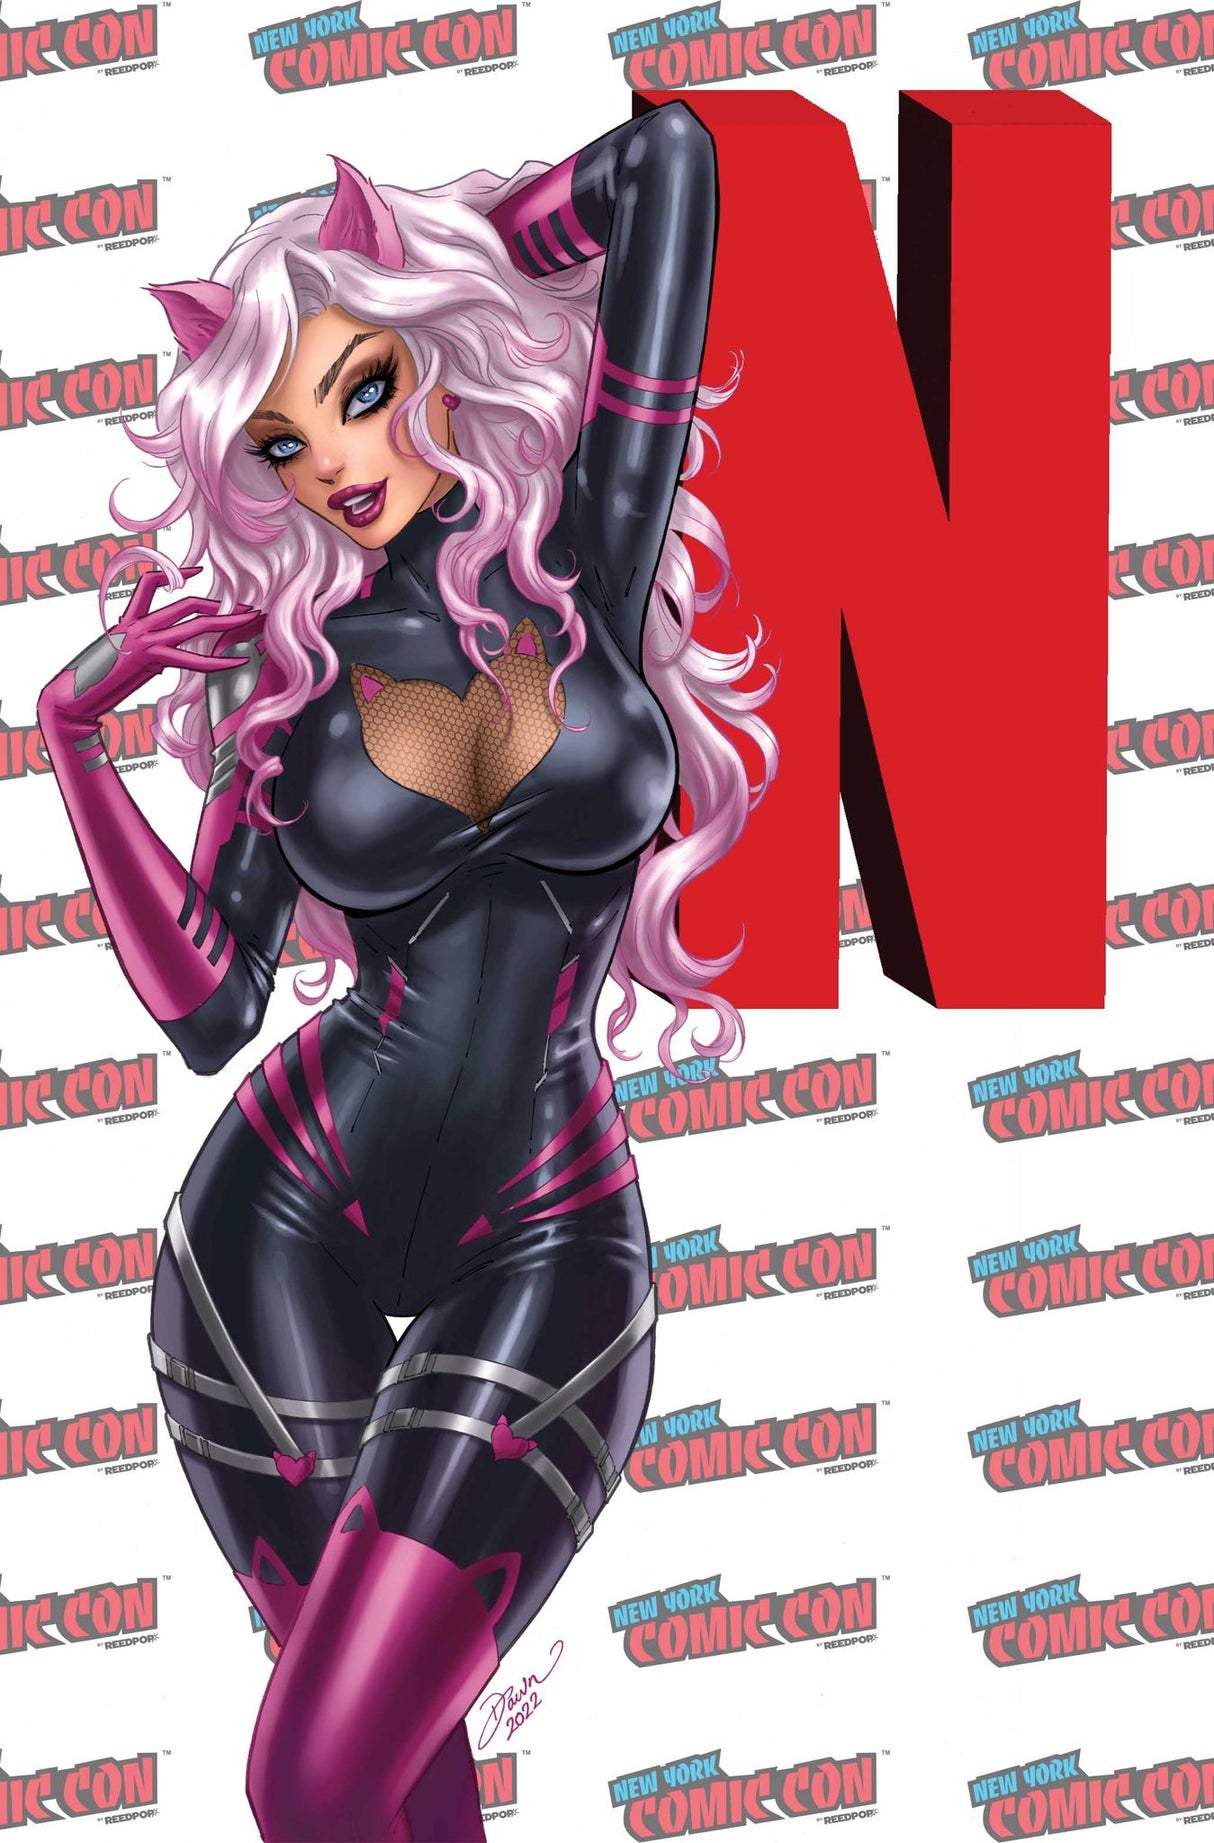 NYCC Miss Meow #4 by Dawn McTeigue